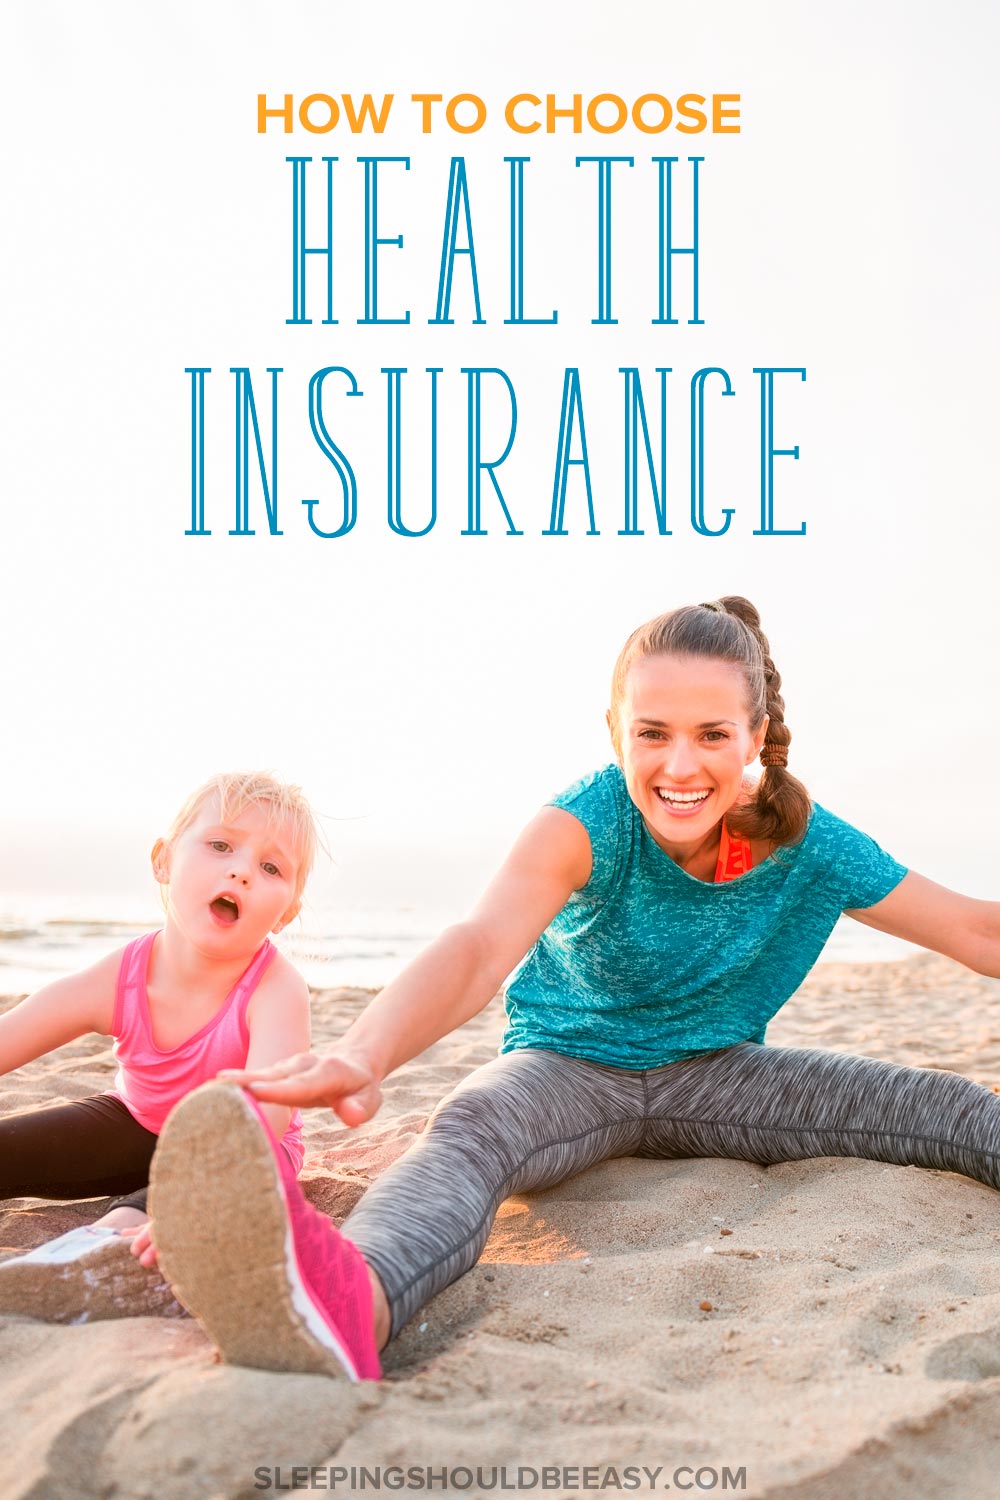 How to Choose Health Insurance: The Tools You Need to Decide